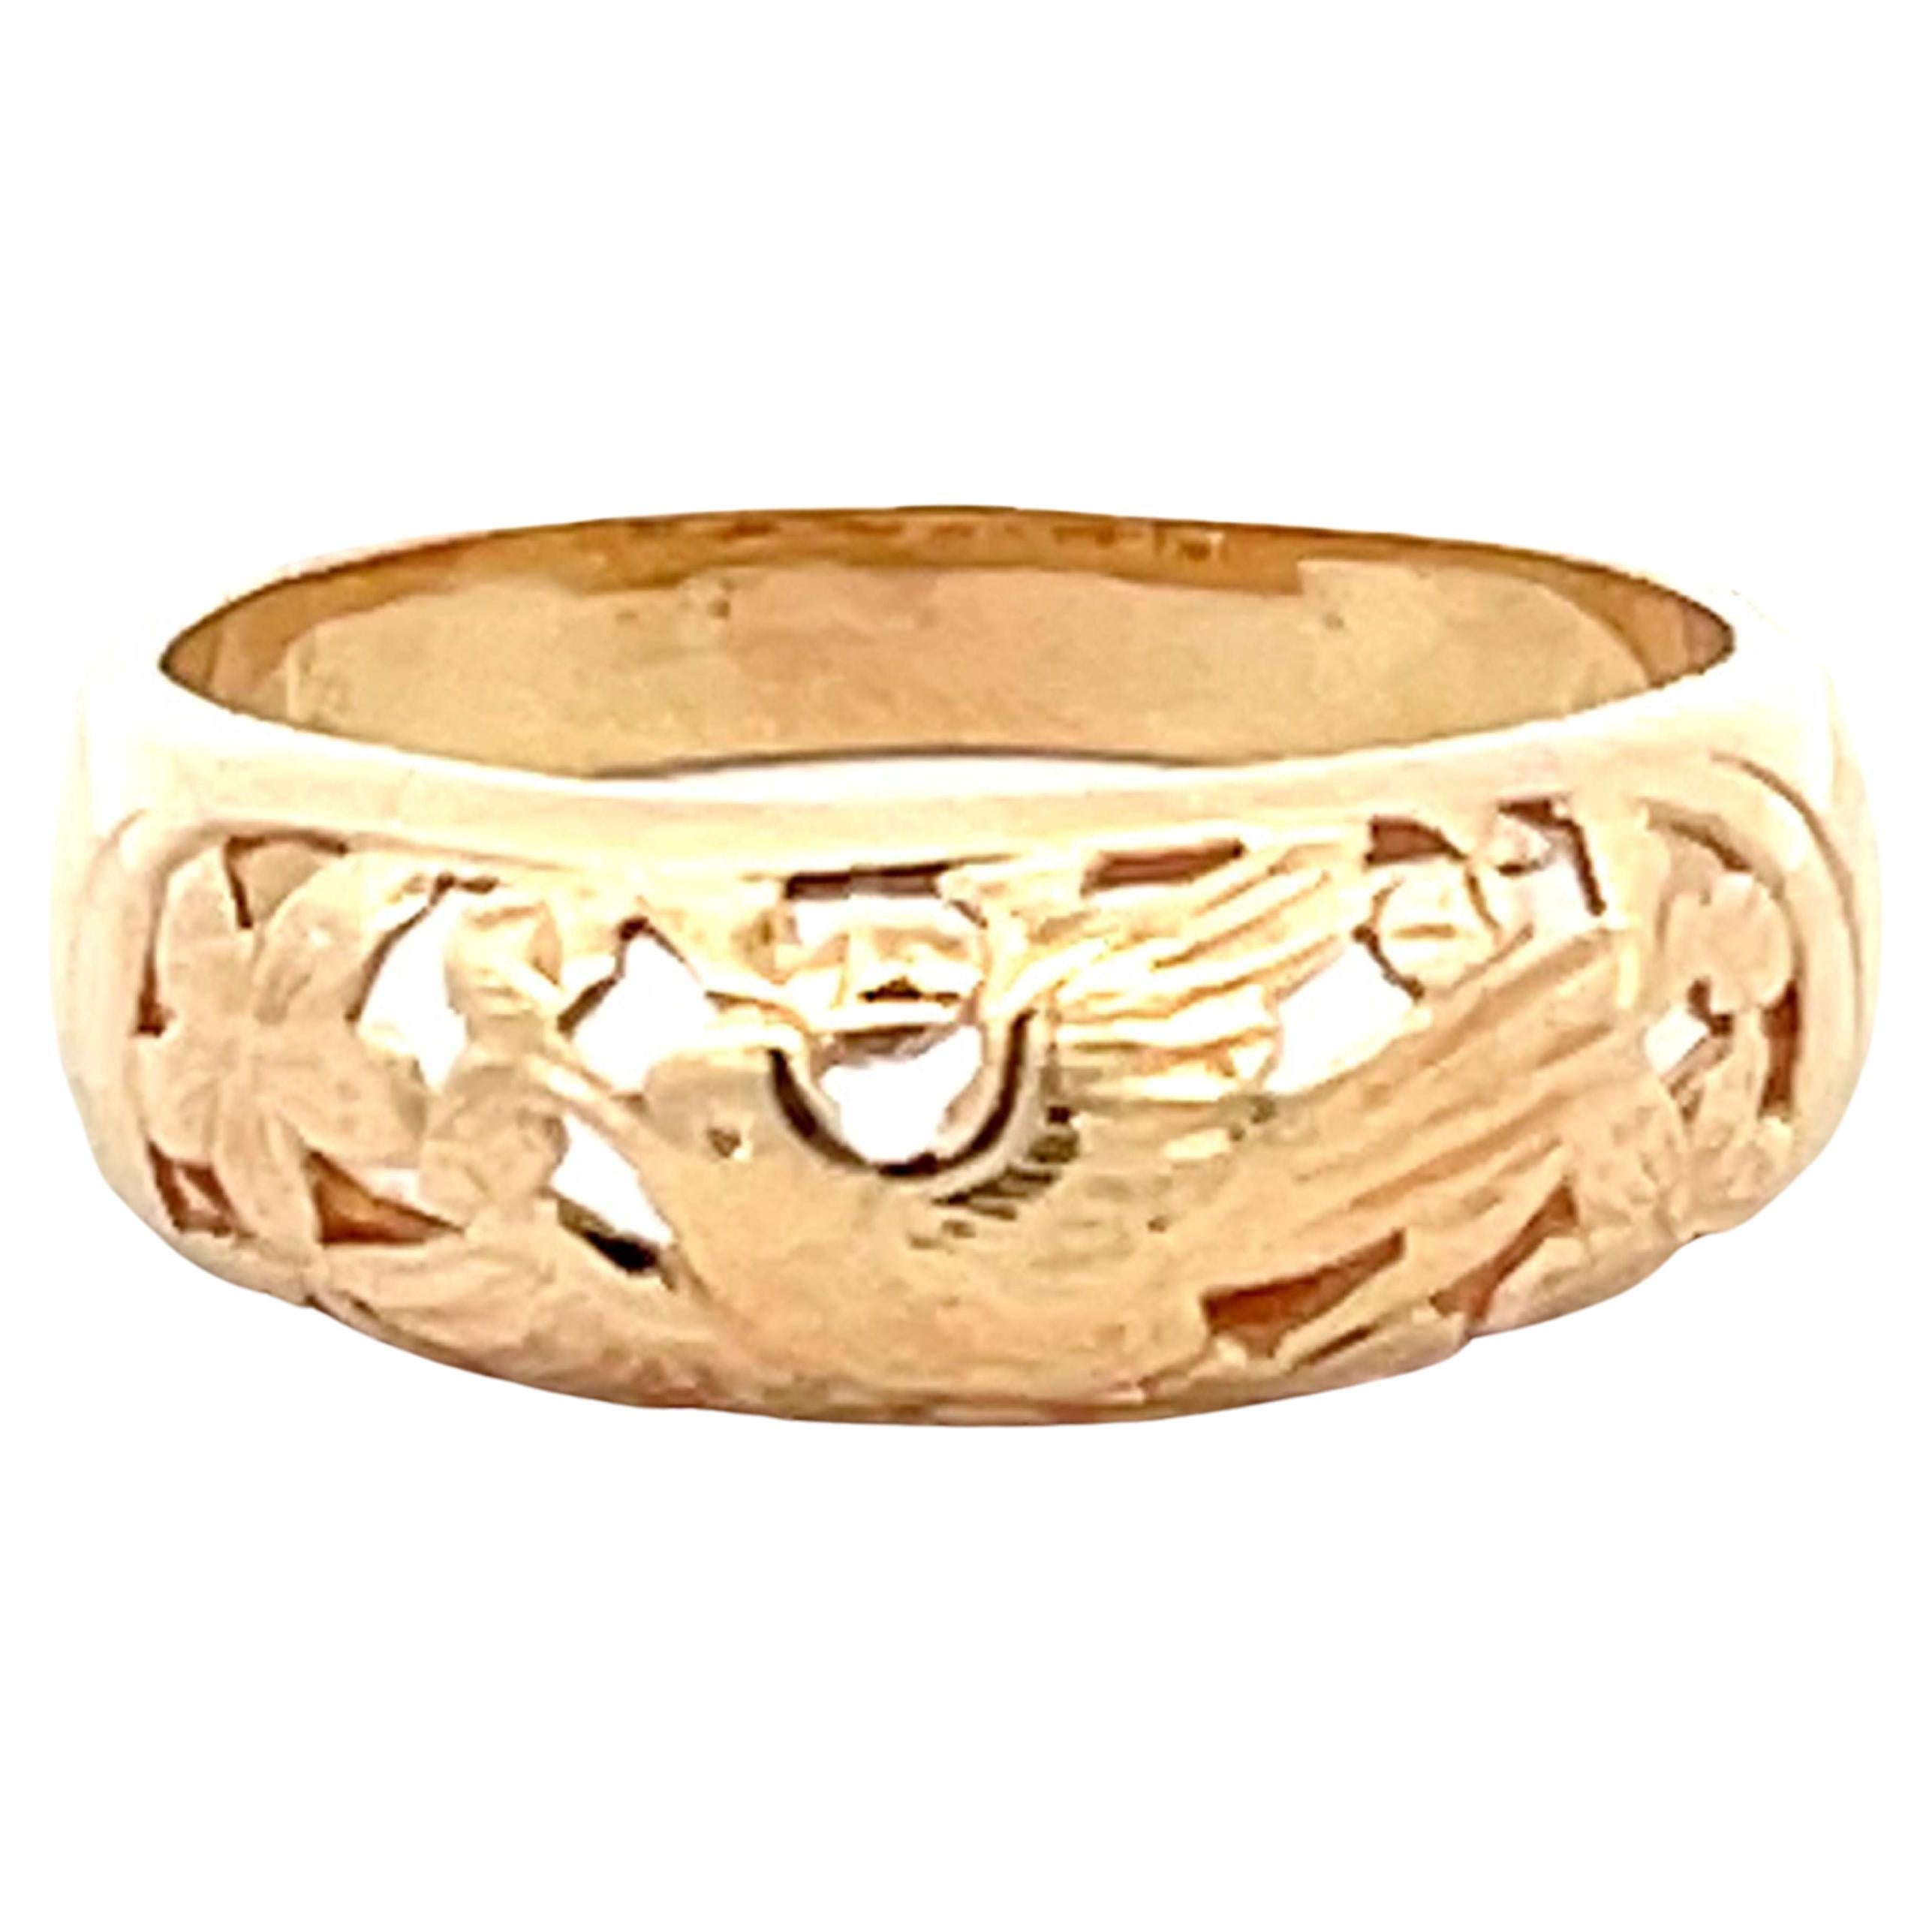 Mings Bird on a Plum Cutout Ring in 14k Yellow Gold For Sale